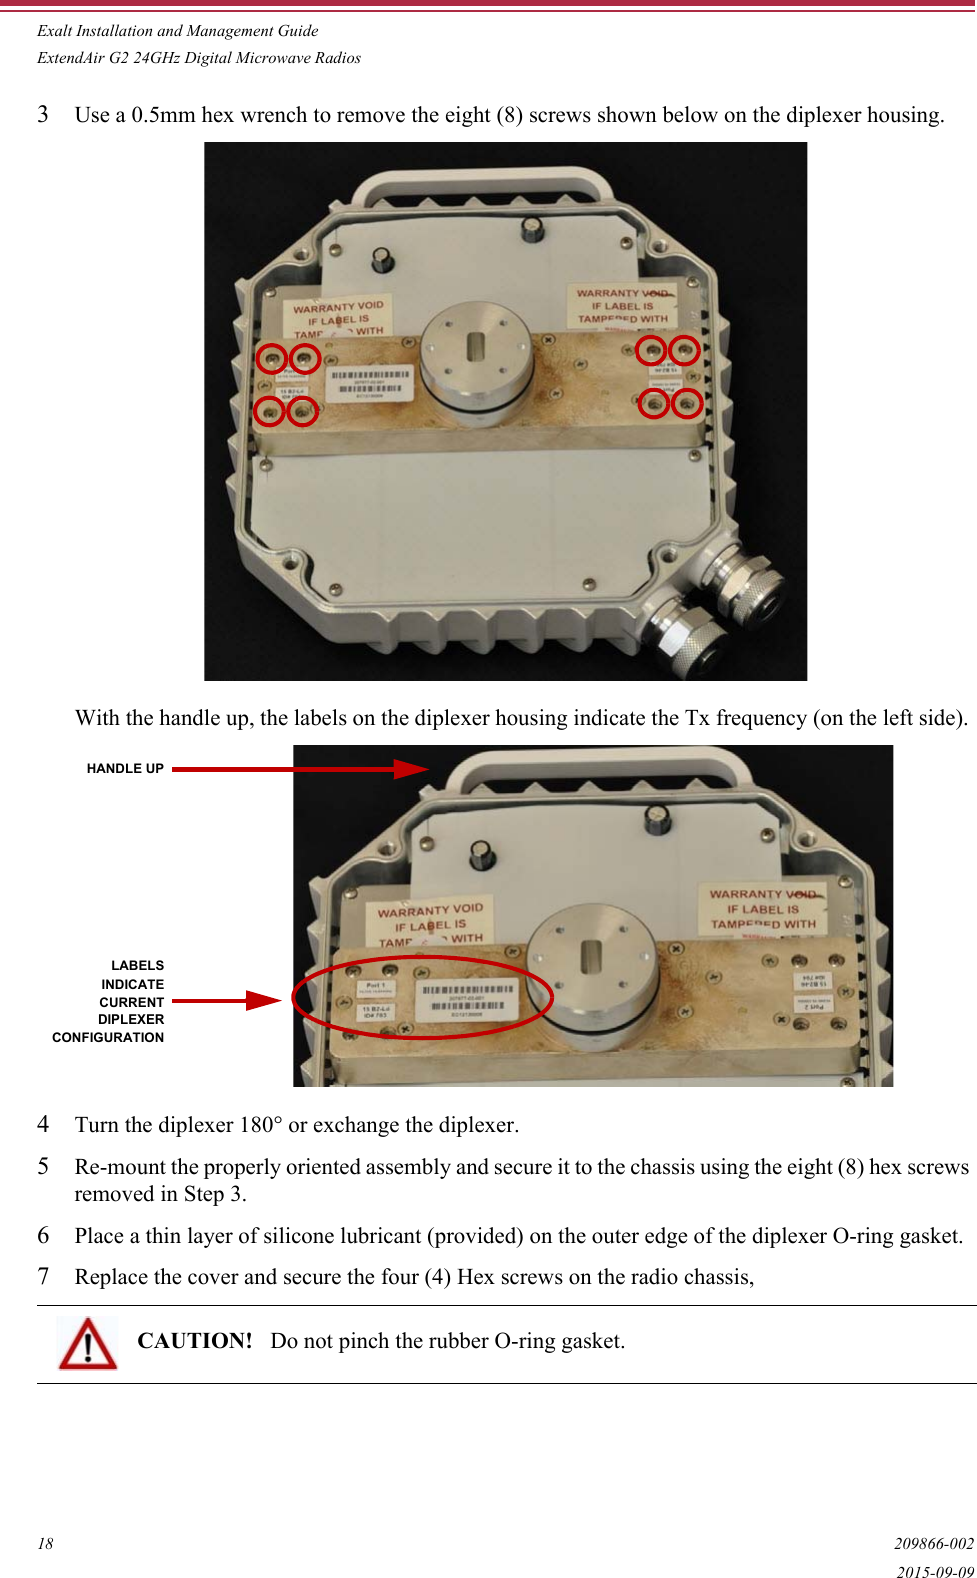 Exalt Installation and Management GuideExtendAir G2 24GHz Digital Microwave Radios18 209866-0022015-09-093Use a 0.5mm hex wrench to remove the eight (8) screws shown below on the diplexer housing.With the handle up, the labels on the diplexer housing indicate the Tx frequency (on the left side). 4Turn the diplexer 180° or exchange the diplexer.5Re-mount the properly oriented assembly and secure it to the chassis using the eight (8) hex screws removed in Step 3.6Place a thin layer of silicone lubricant (provided) on the outer edge of the diplexer O-ring gasket.7Replace the cover and secure the four (4) Hex screws on the radio chassis, CAUTION!  Do not pinch the rubber O-ring gasket.HANDLE UPDIPLEXERCONFIGURATIONCURRENTINDICATELABELS